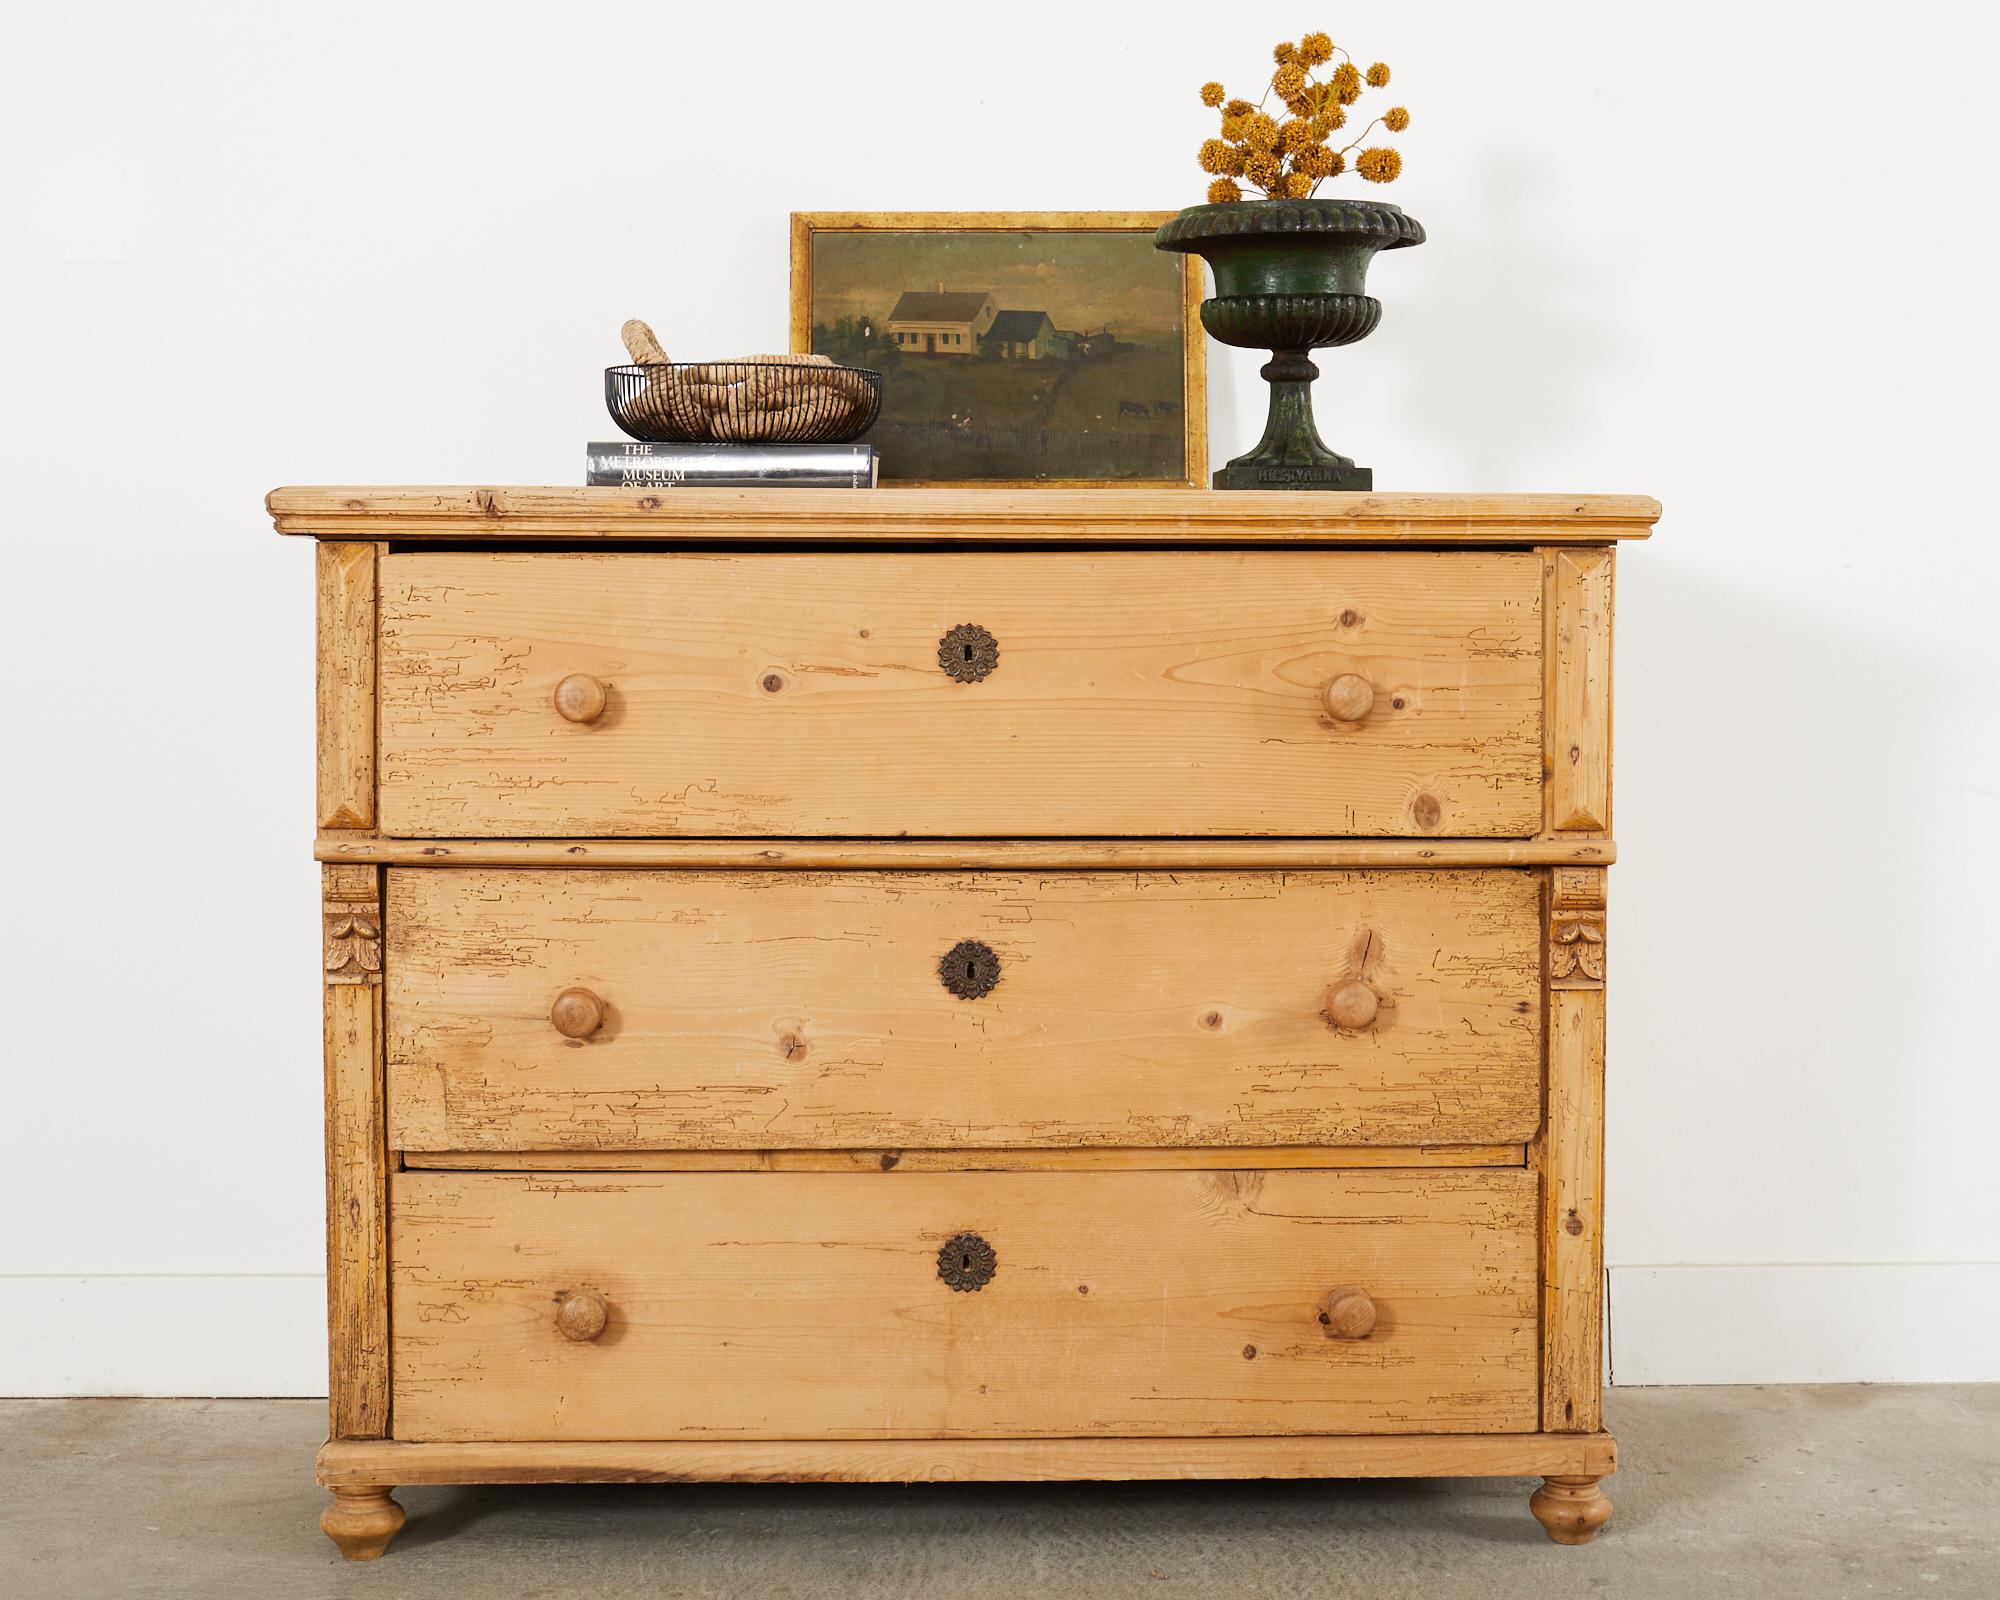 Grand 19th century country English provincial chest of drawers or commode crafted from thick pine boards. The pine has a desirable aged and distressed patina with prior insect damage and wear on the finish. The chest is fronted by three large